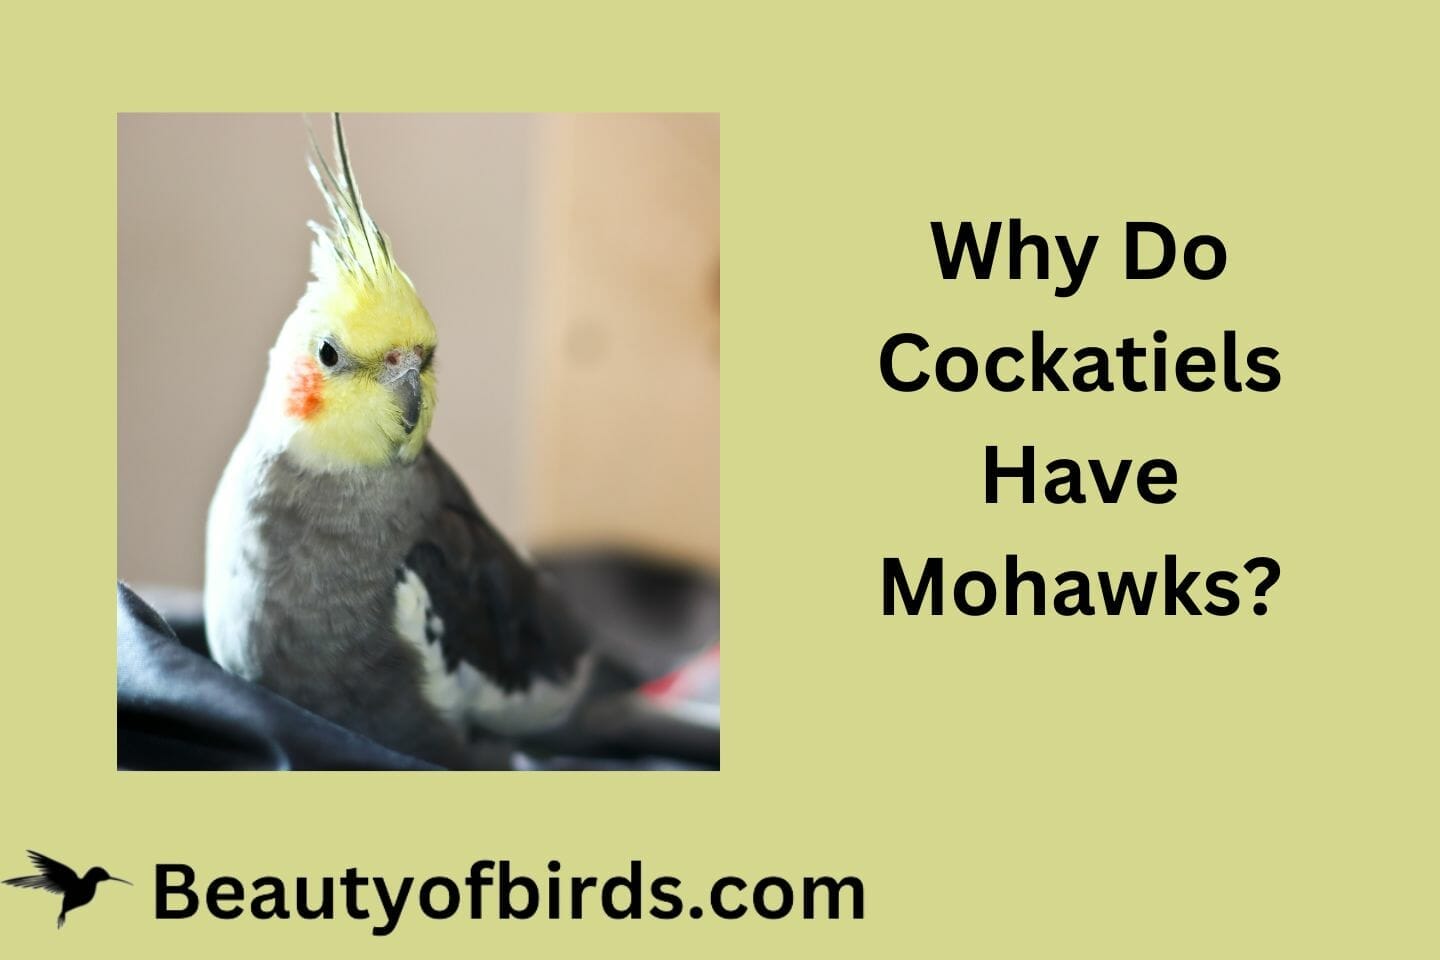 Why Do Cockatiels Have Mohawks